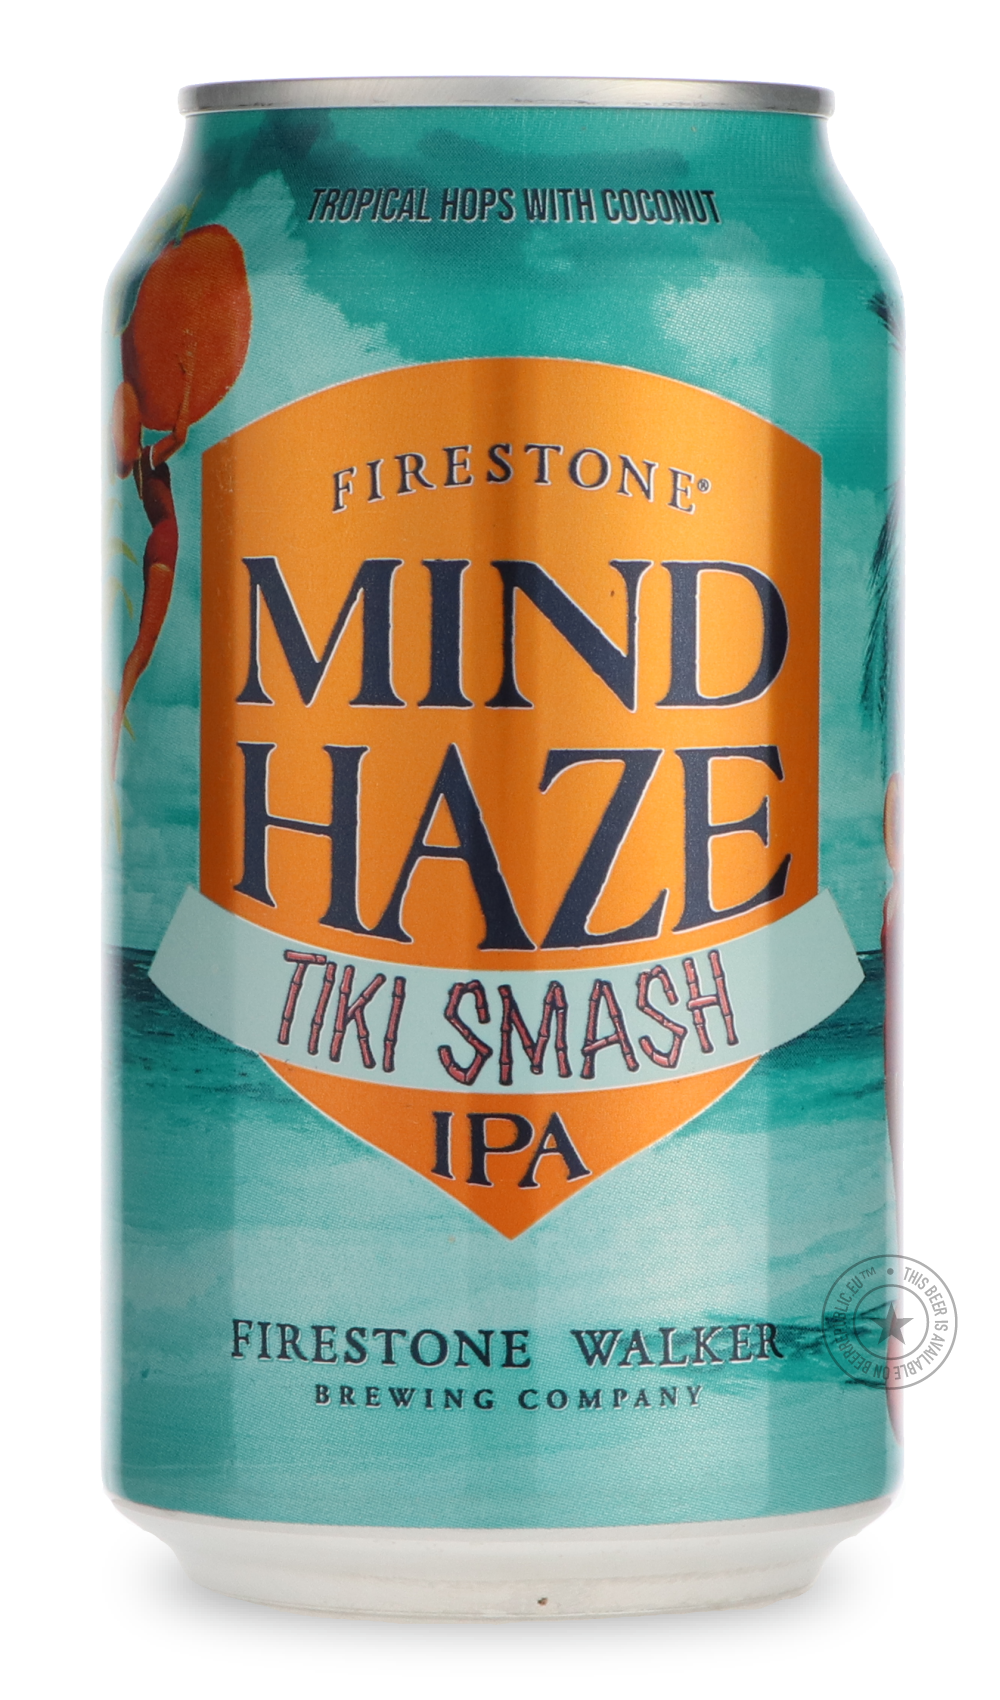 -Firestone Walker- Mind Haze Tiki Smash-IPA- Only @ Beer Republic - The best online beer store for American & Canadian craft beer - Buy beer online from the USA and Canada - Bier online kopen - Amerikaans bier kopen - Craft beer store - Craft beer kopen - Amerikanisch bier kaufen - Bier online kaufen - Acheter biere online - IPA - Stout - Porter - New England IPA - Hazy IPA - Imperial Stout - Barrel Aged - Barrel Aged Imperial Stout - Brown - Dark beer - Blond - Blonde - Pilsner - Lager - Wheat - Weizen - A